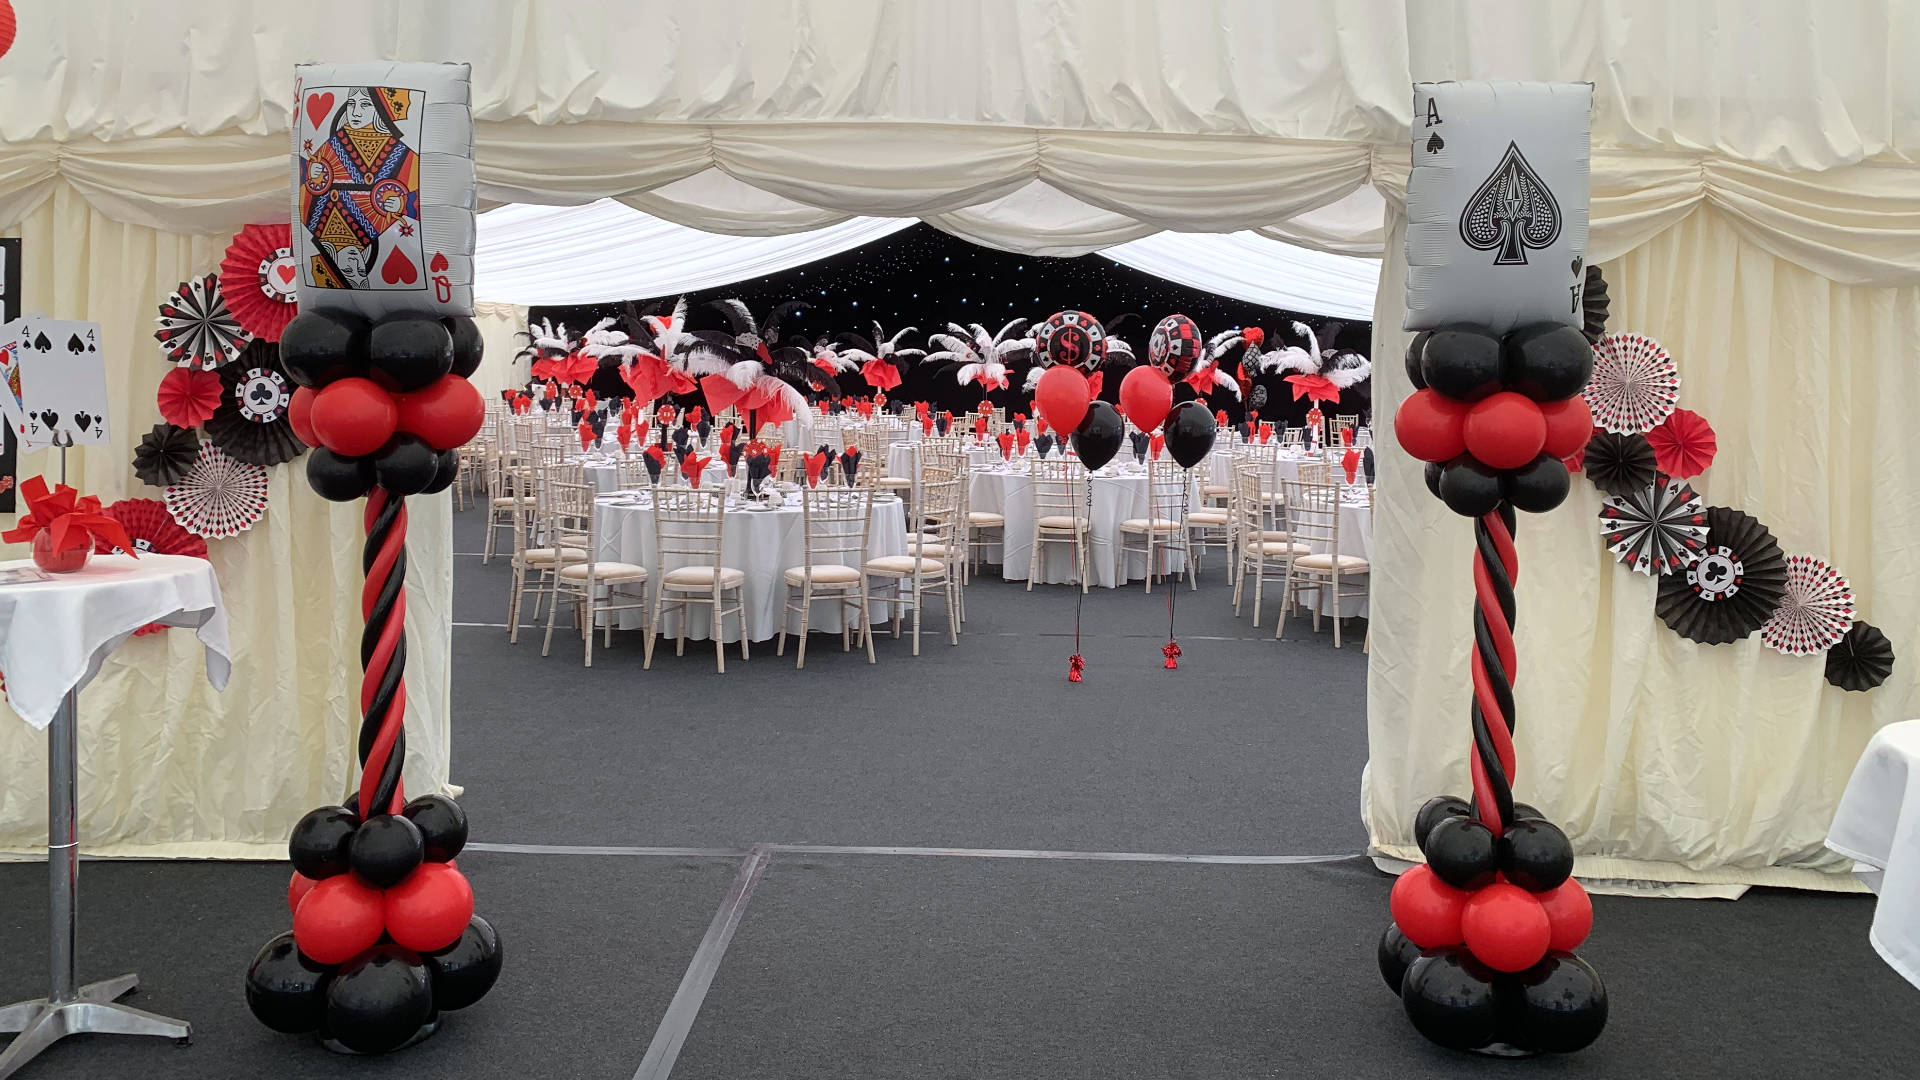 Balloon Columns for Parties or Business Events